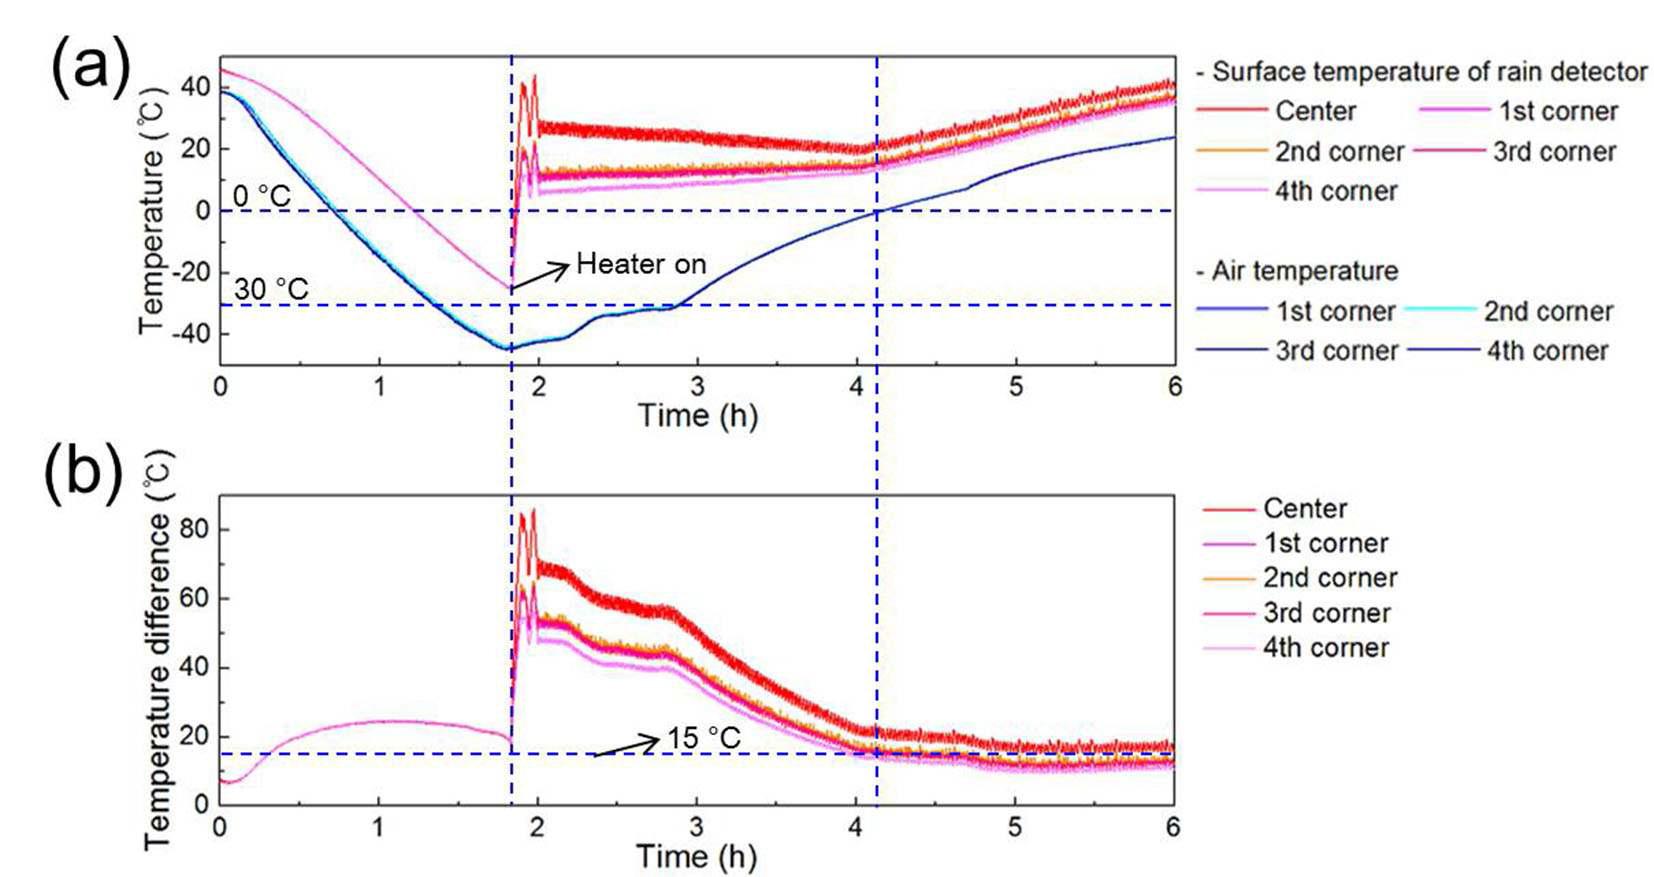 (a) Temperature measurements on the rain detector surface (red) and surrounding air (blue) inside the freezer chamber as a function of time with varying air temperature when there is no rain/snow. The measurements of the surface temperature of a rain detector and the air temperature were performed on five and four spots, respectively. (b) Difference between the air temperature and the surface temperature of the rain detector as a function time.